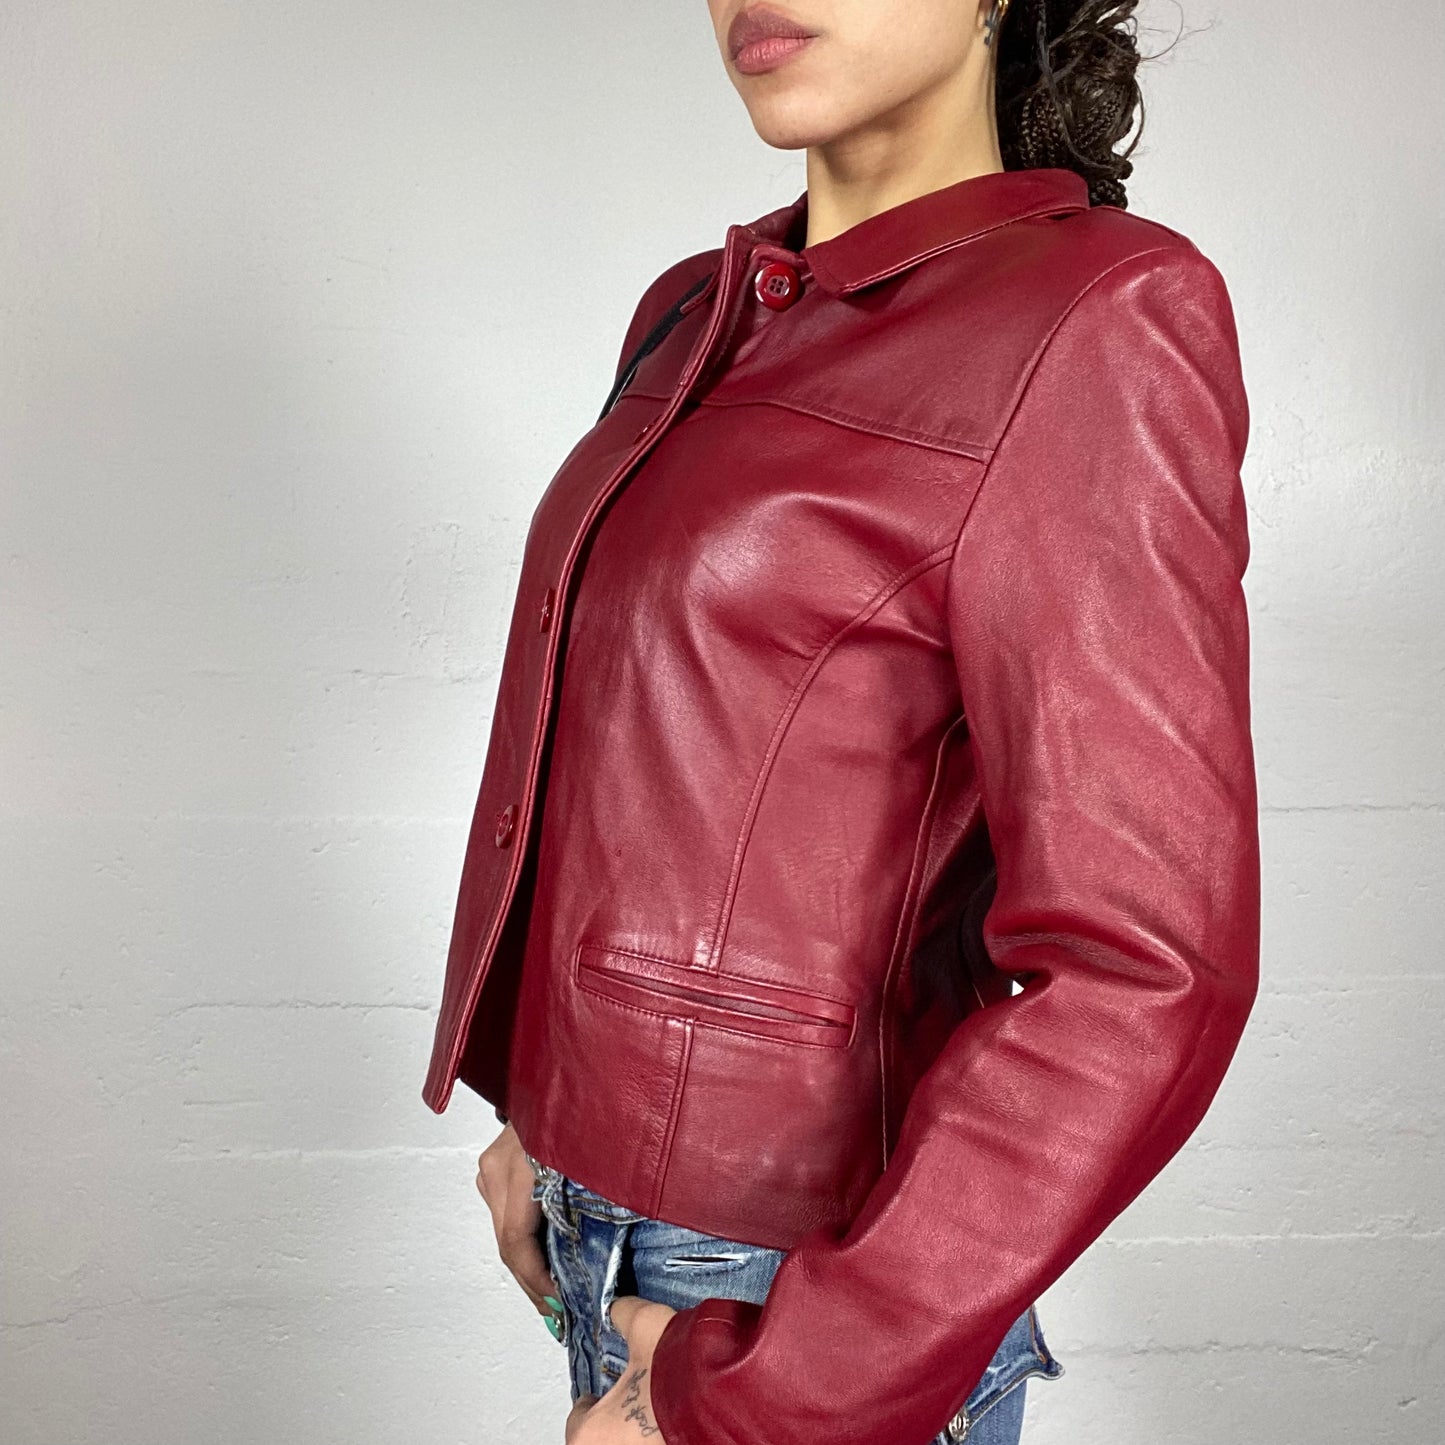 Vintage 2000 Classic Dark Red Leather Jacket with Buttons (M)